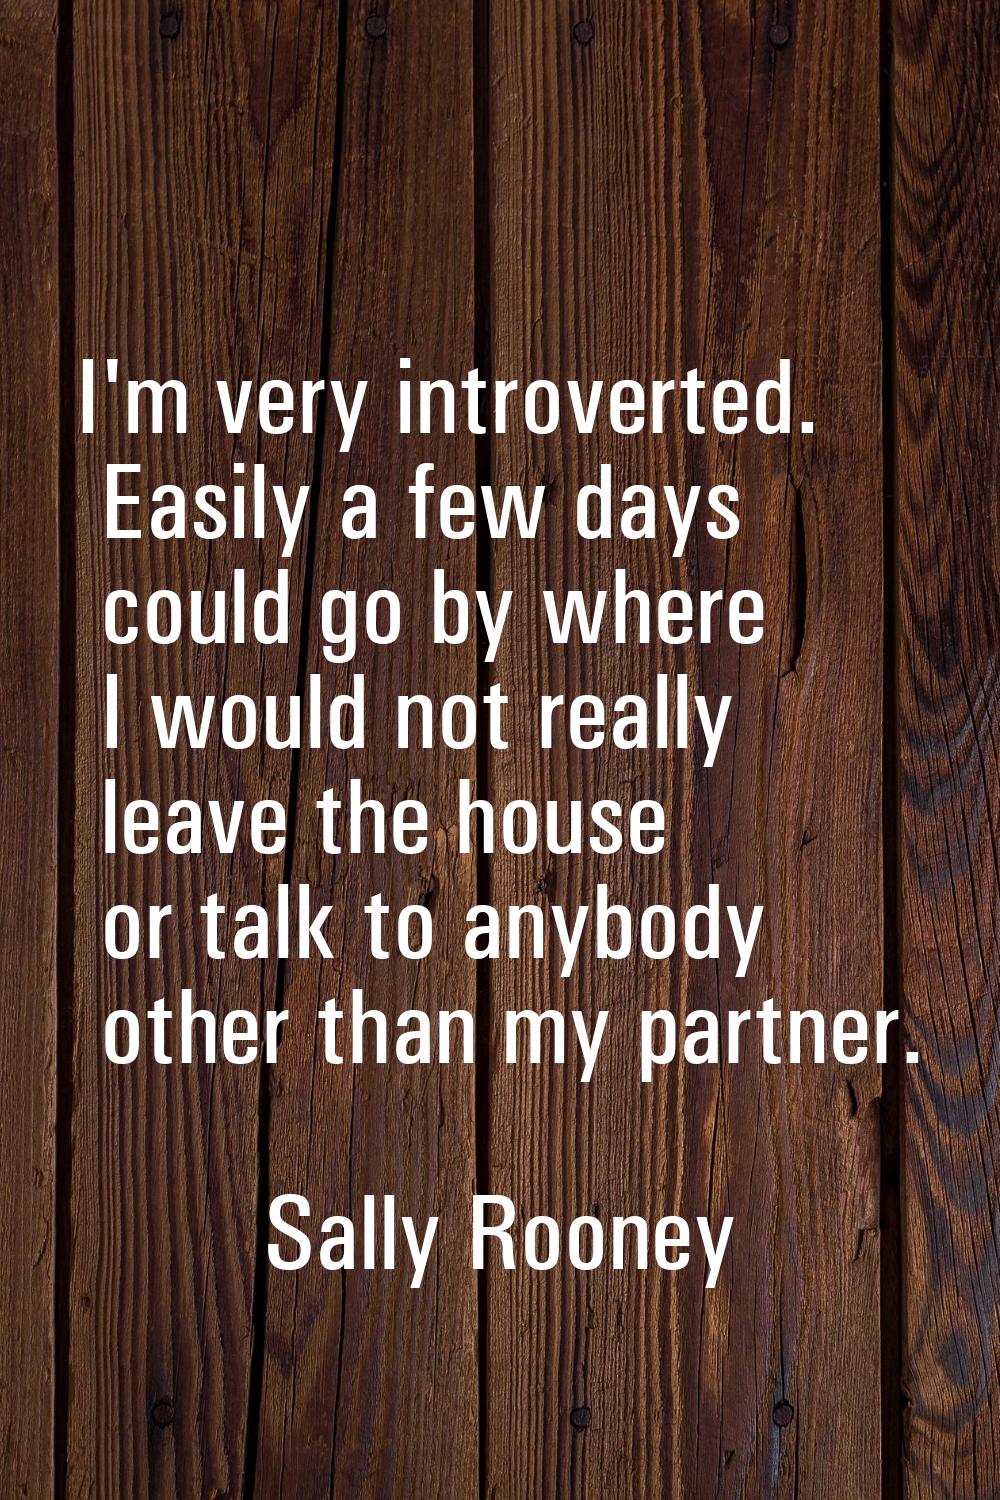 I'm very introverted. Easily a few days could go by where I would not really leave the house or tal